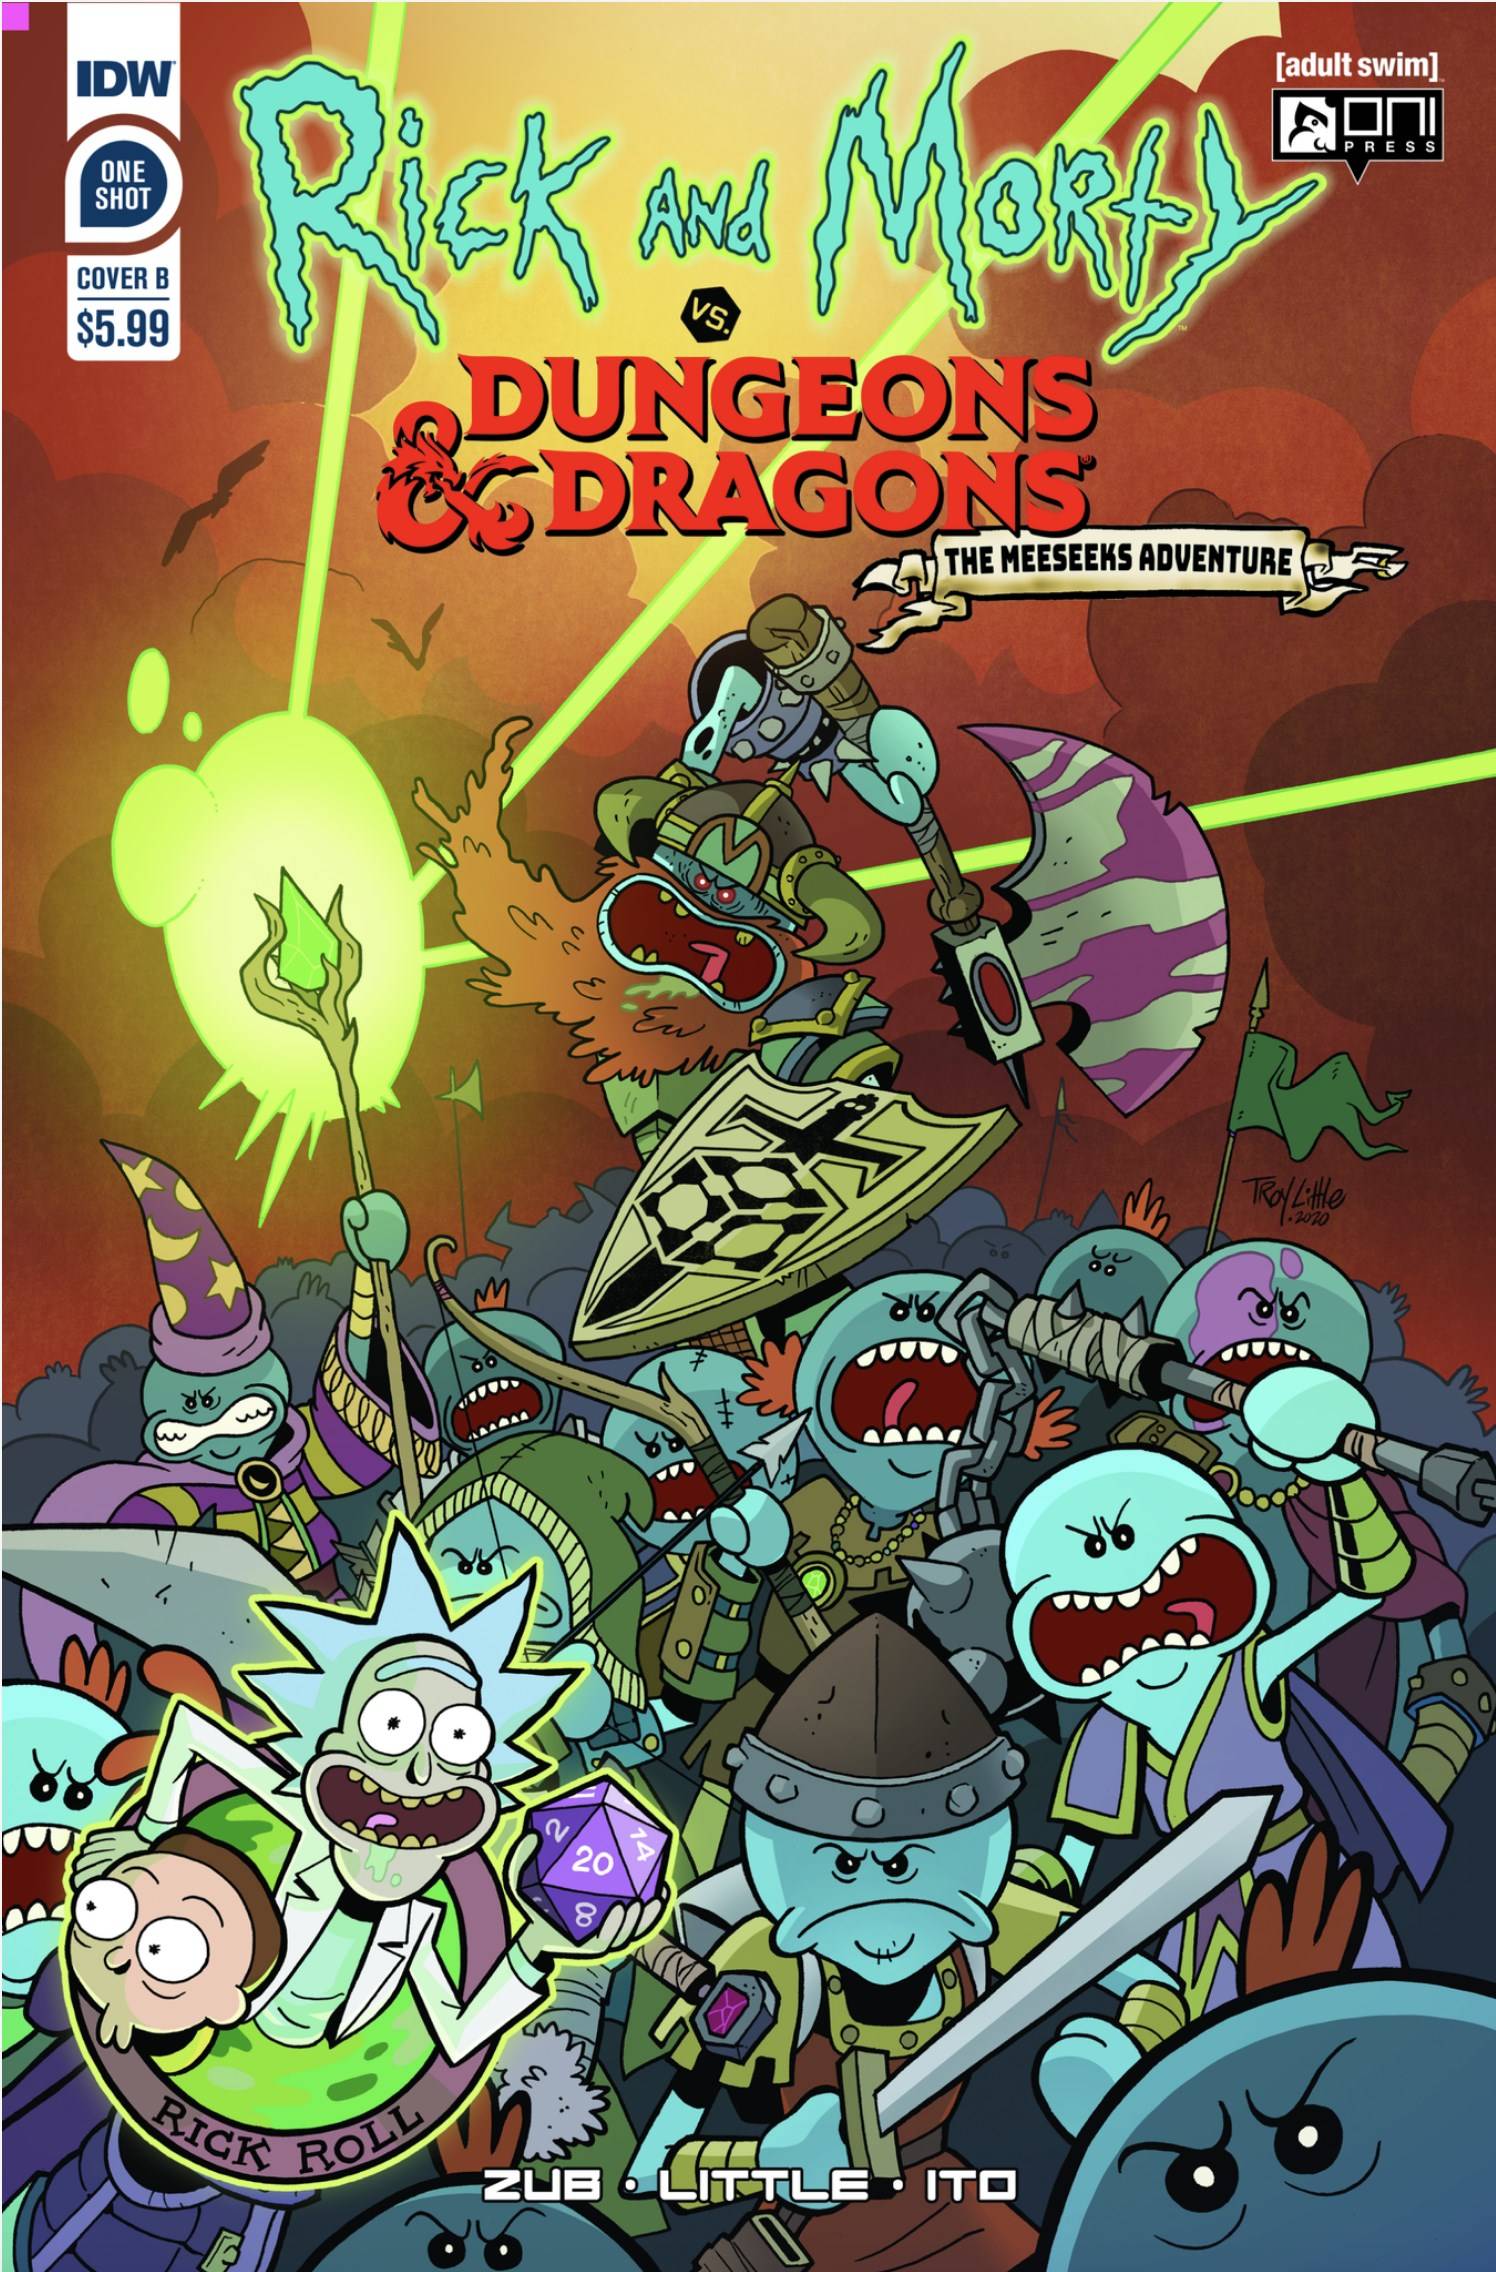 RICK & MORTY VS DUNGEONS & DRAGONS MEESEEKS CVR B LITTLE | Game Master's Emporium (The New GME)